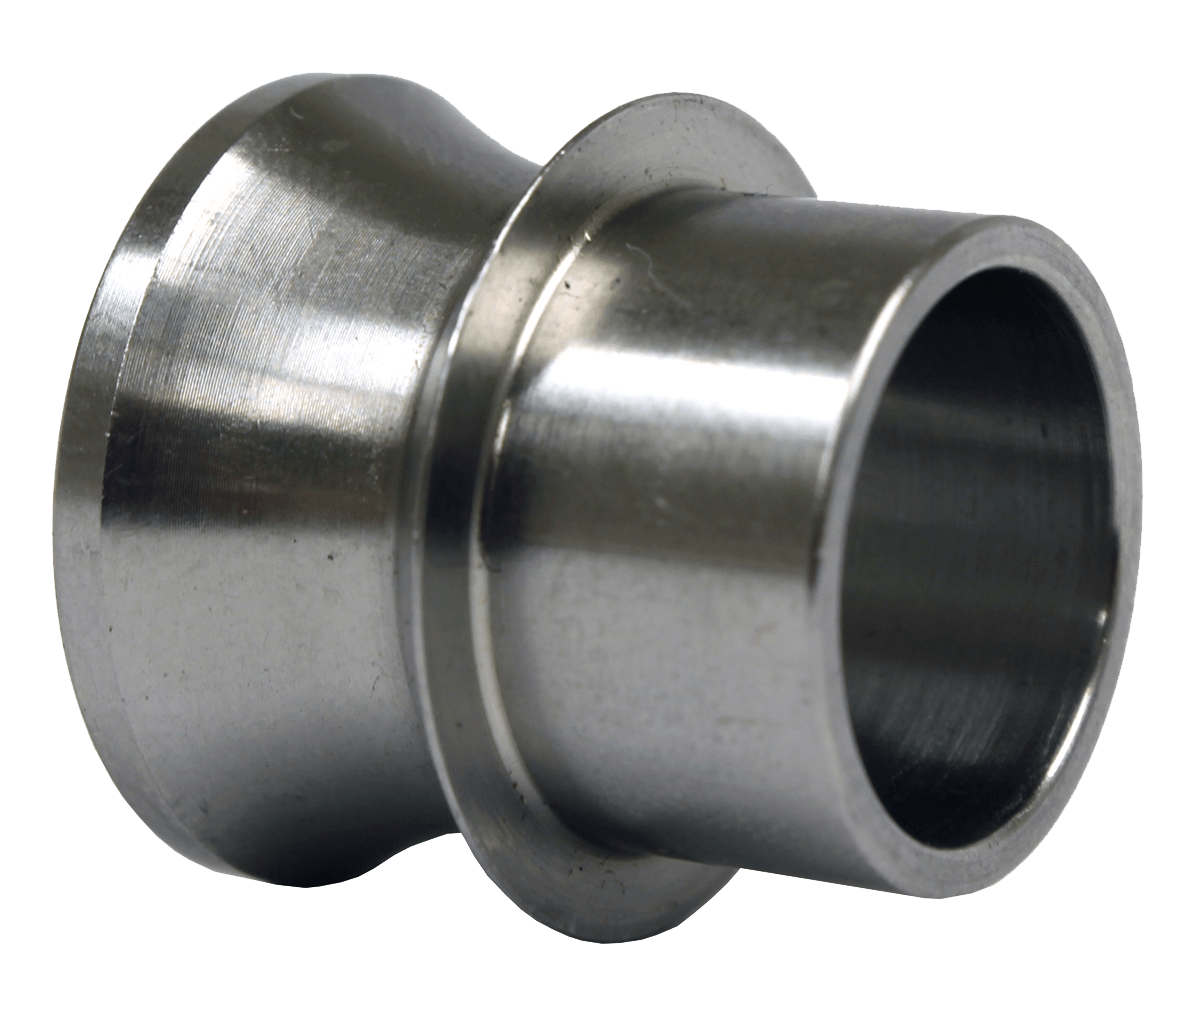 QA1 SN8-66 High Misalignment Spacer, .5 inch Od Ss, .375 inch X 1.25 inch Total Width